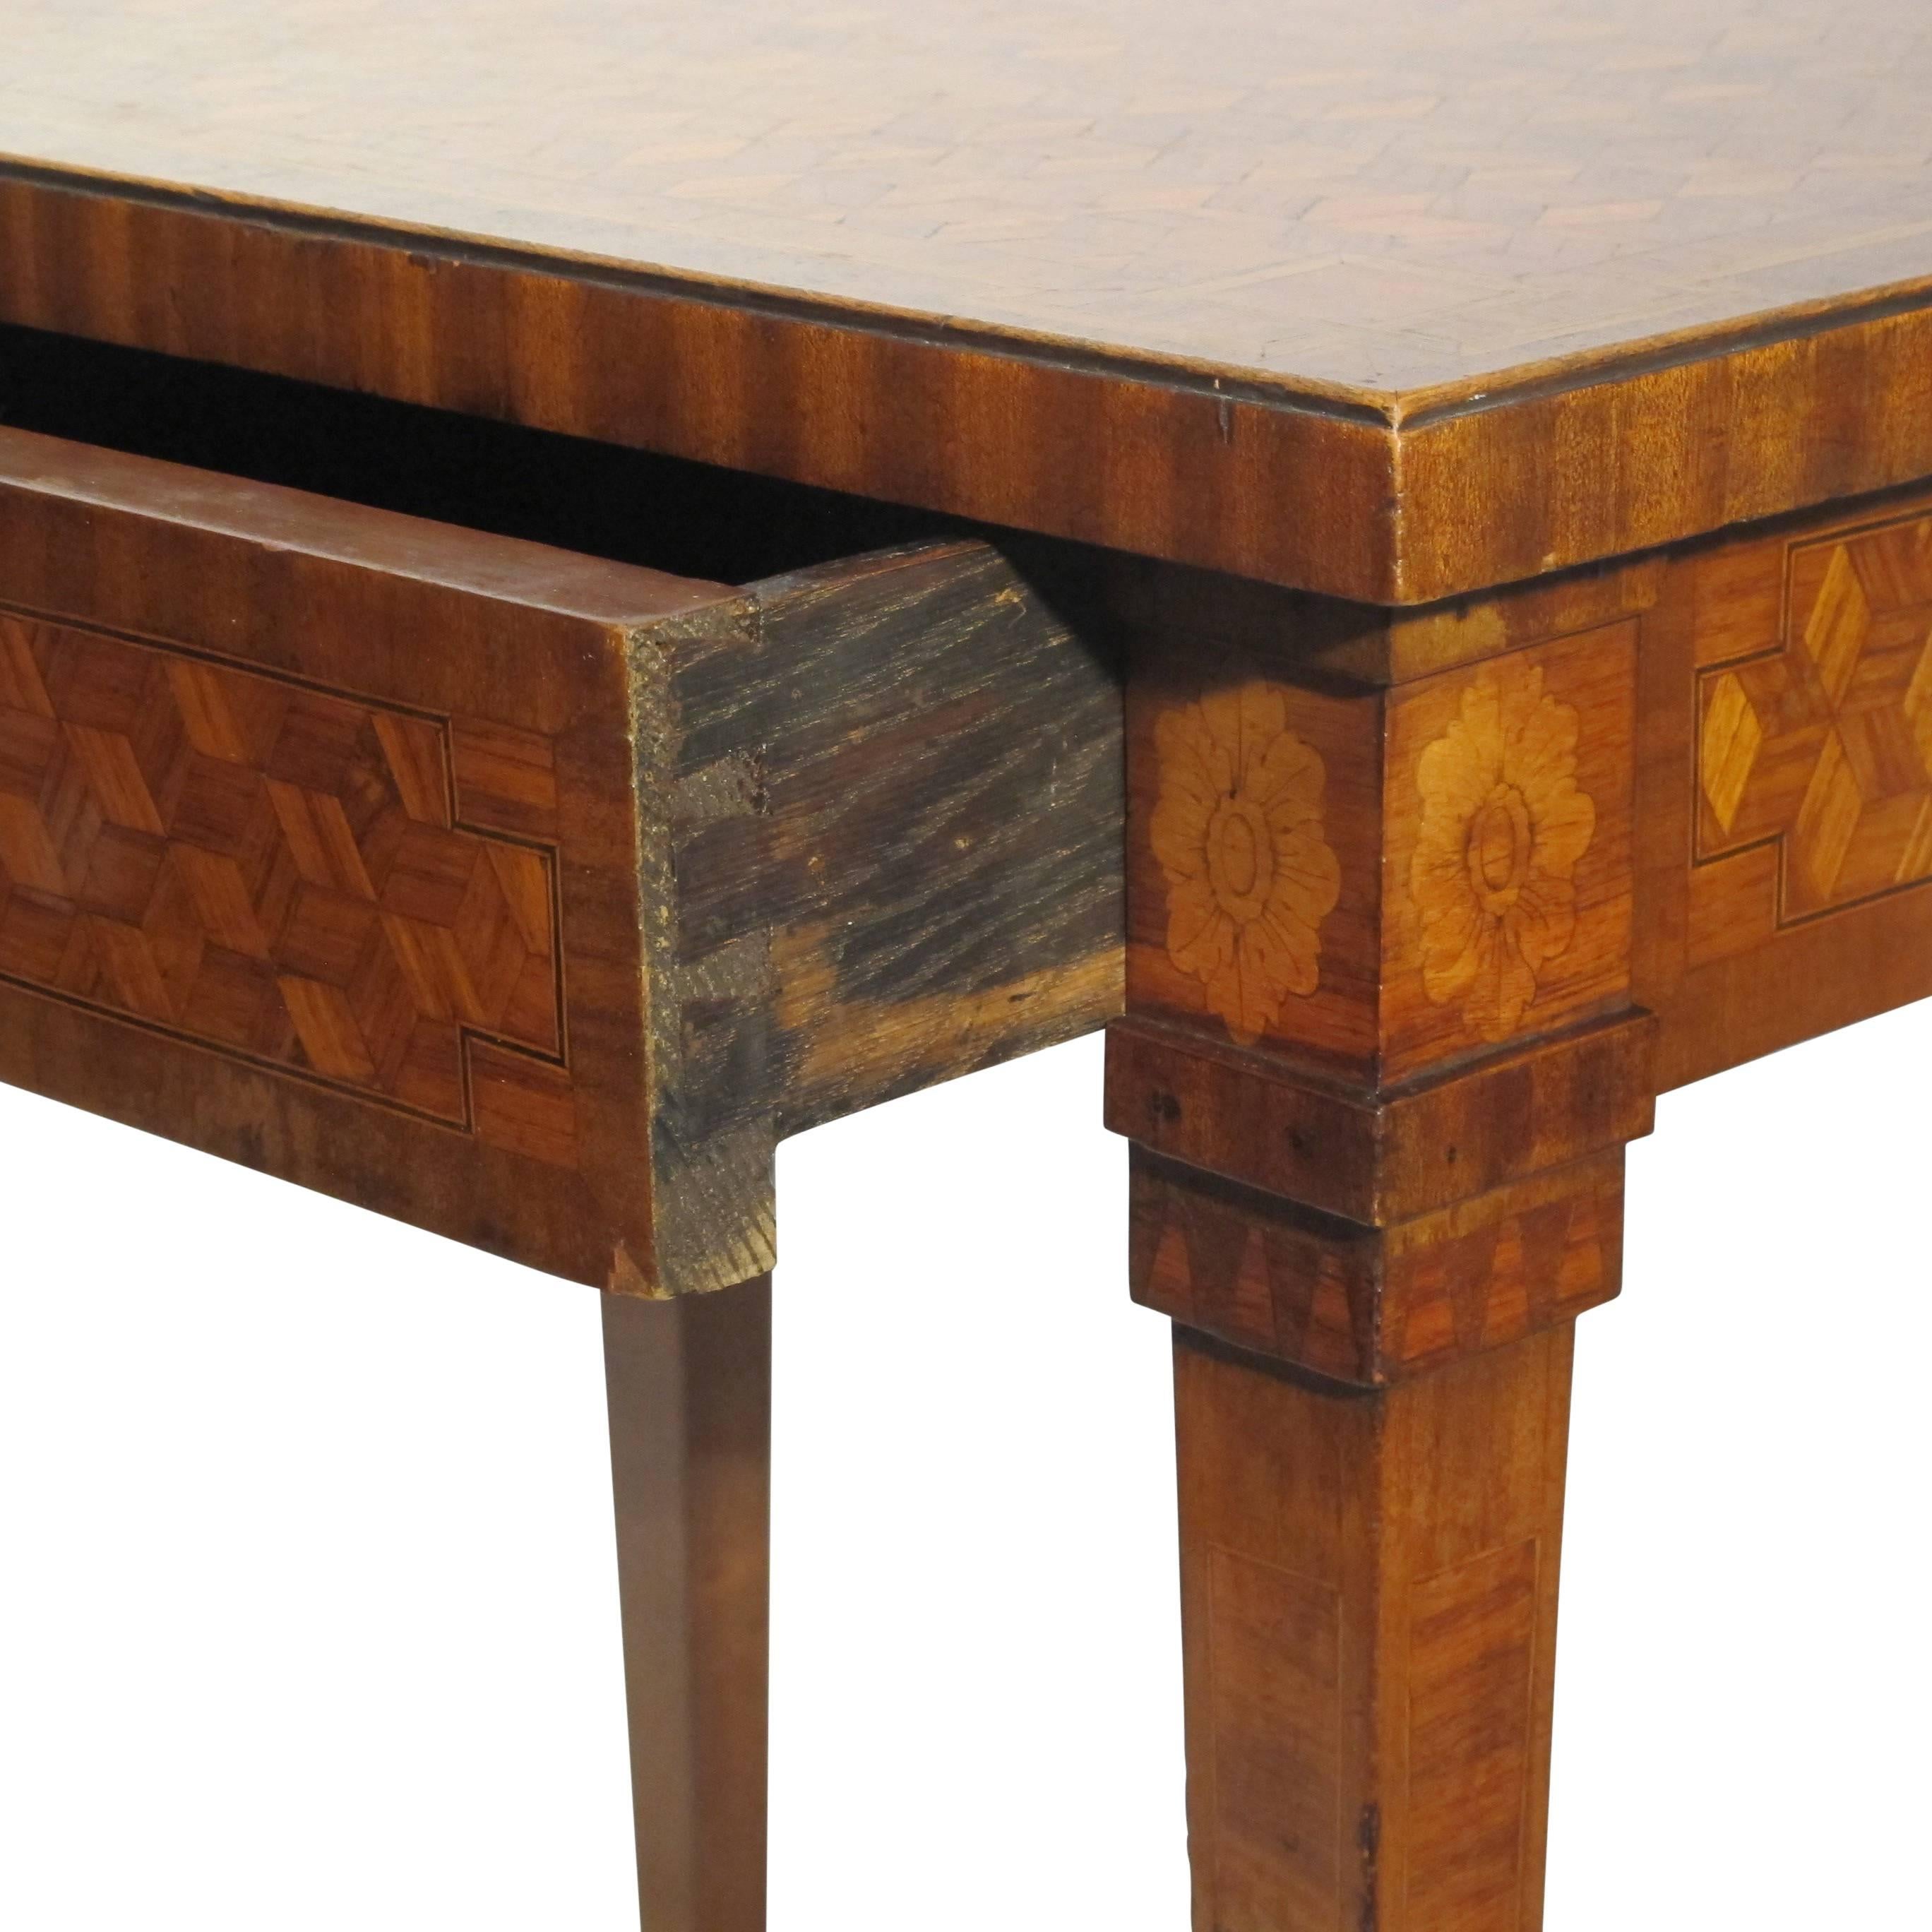 Walnut and Mixed Fruitwood Parquetry Side Table, French, 18th Century For Sale 1